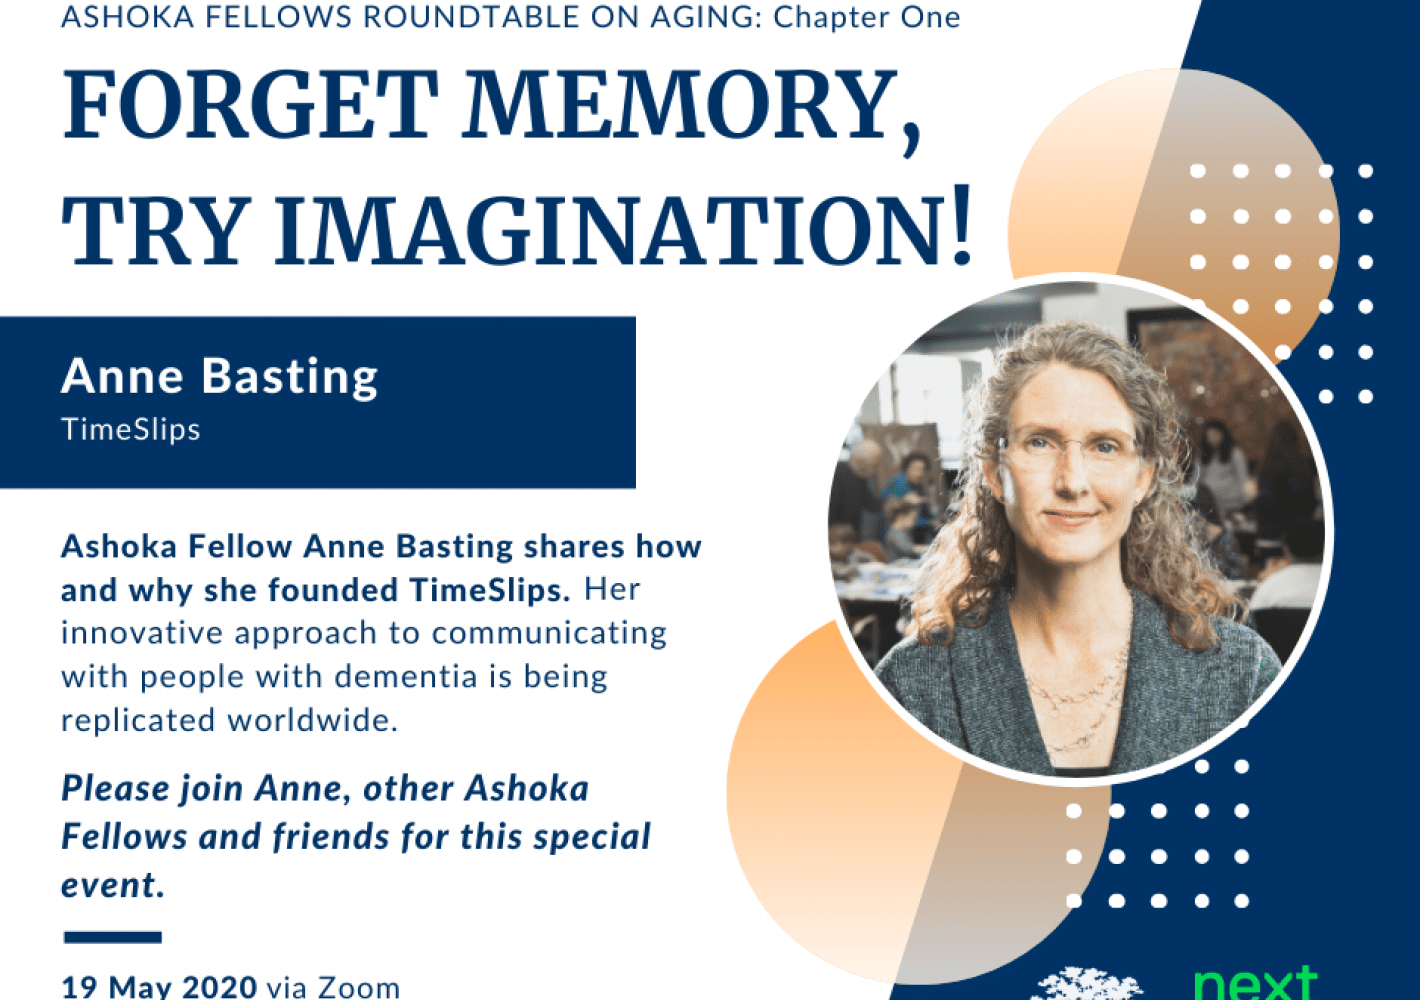 Anne Basting: Forget Memory, Try Imagination